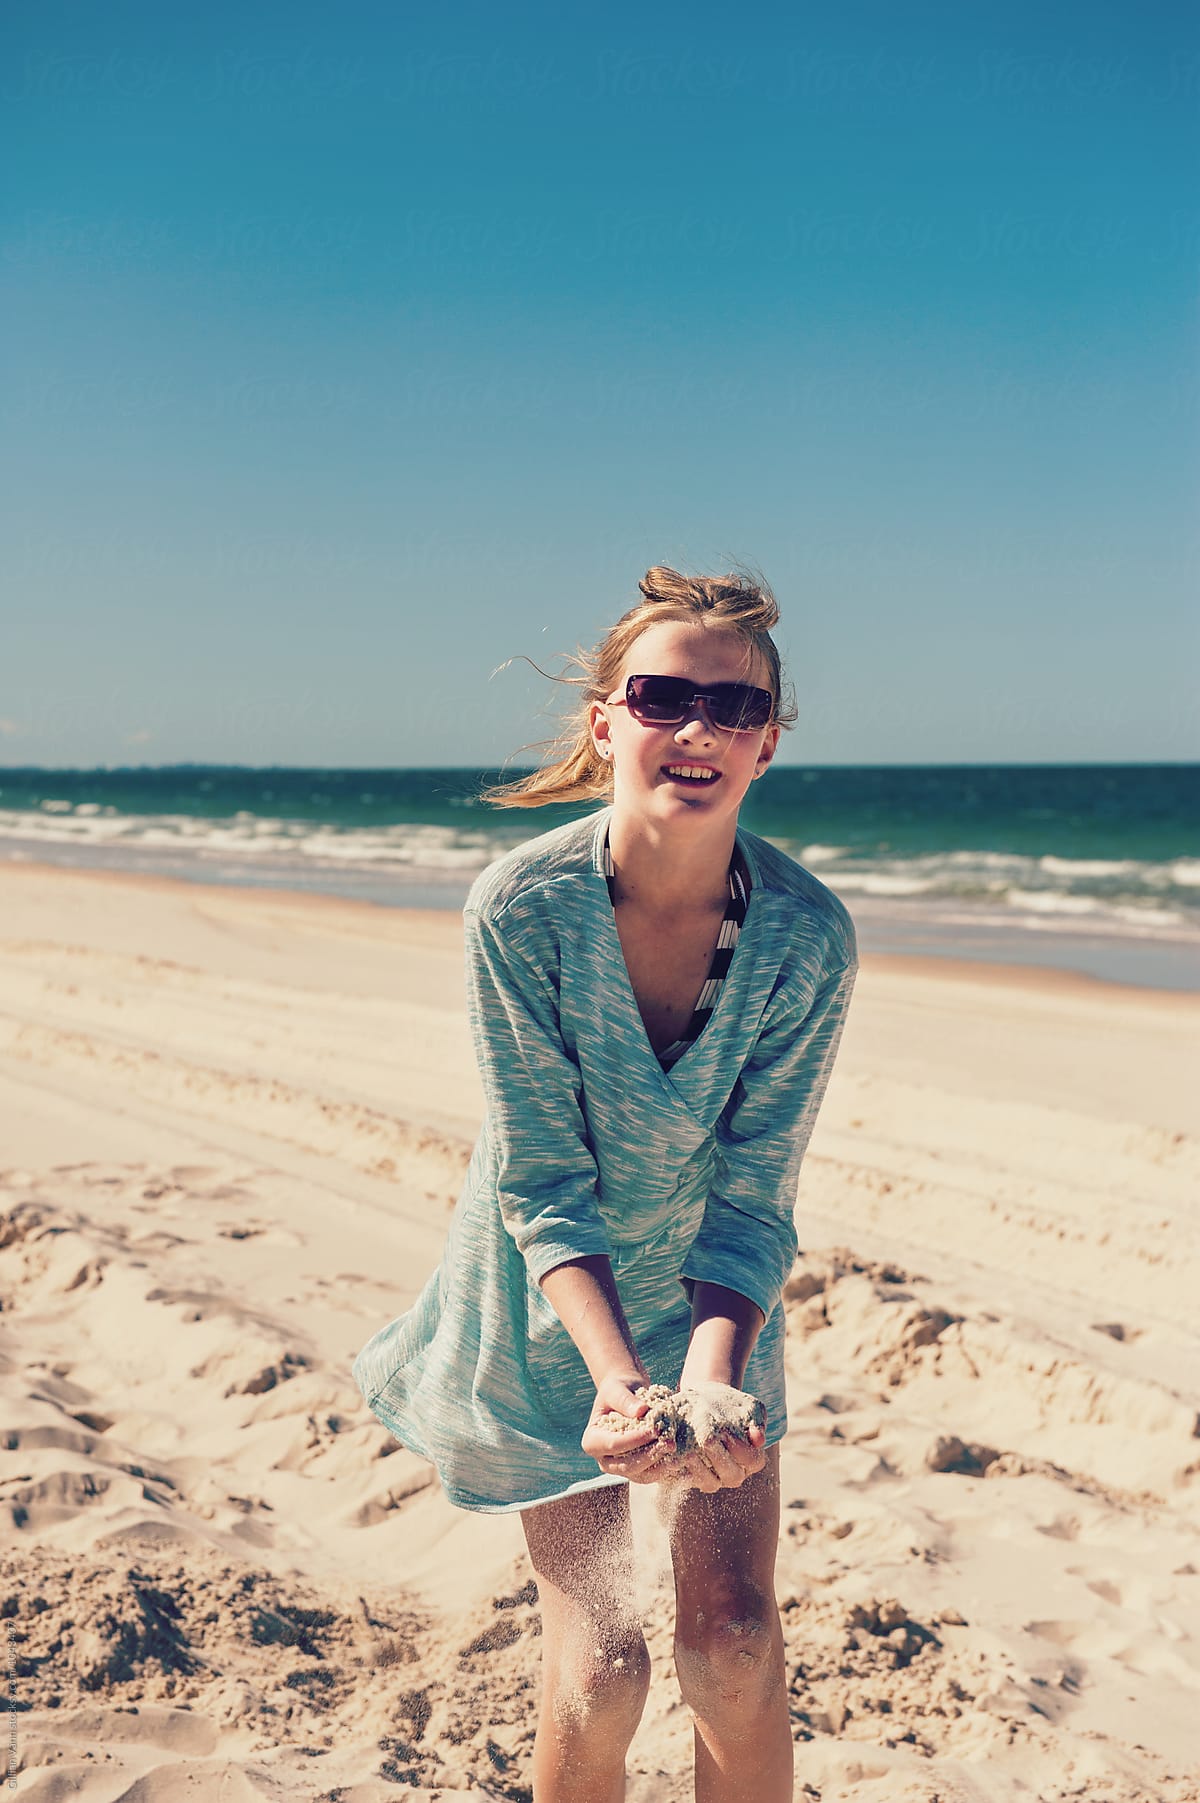 Tween Girl Playing In The Sand At The Beach, Wearing Sunglasses by